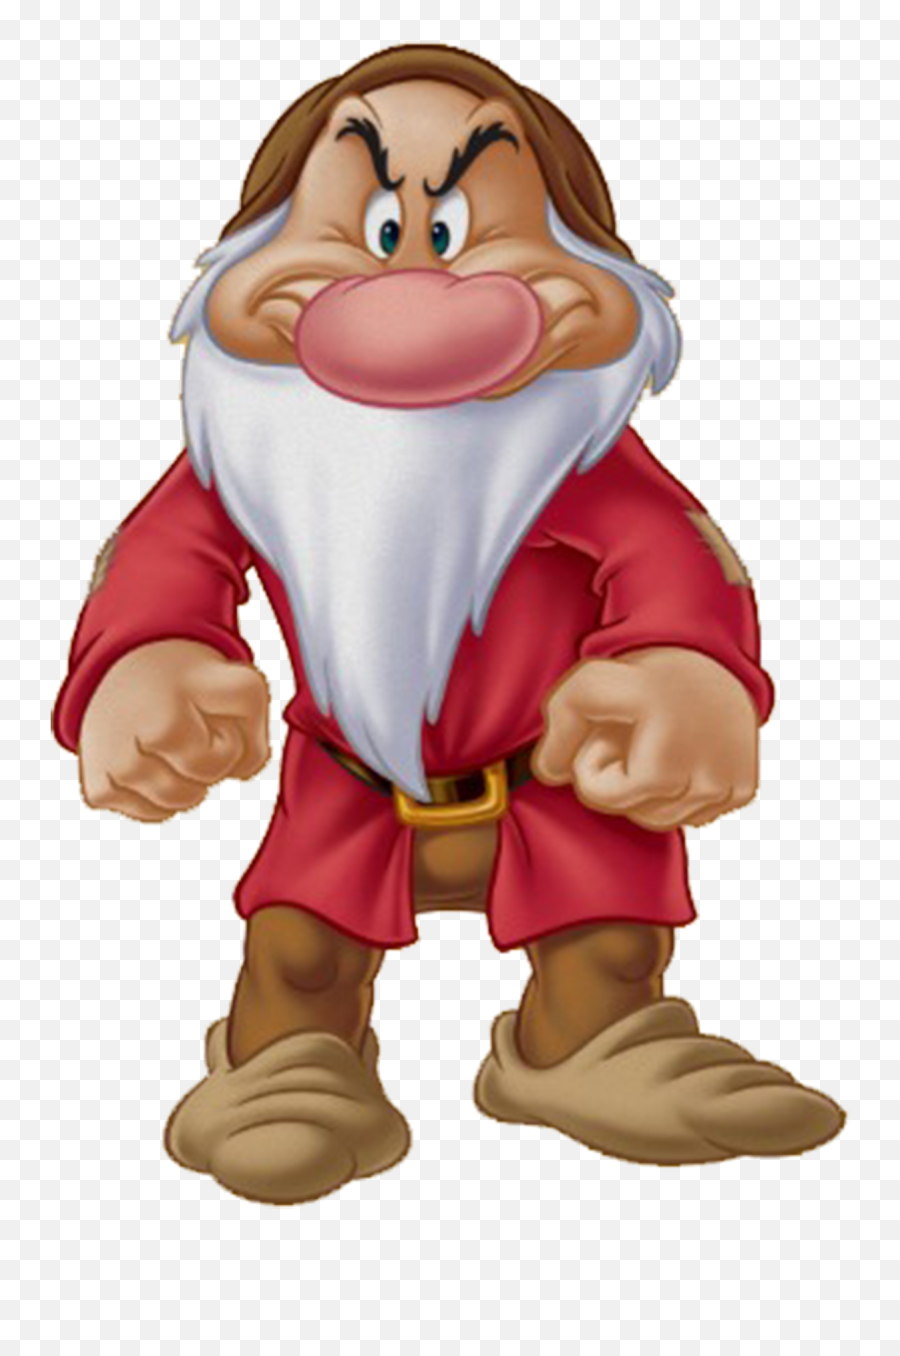 Download Dwarf Png Image For Free - Grumpy Snow White And The Seven Dwarfs,Midget Png